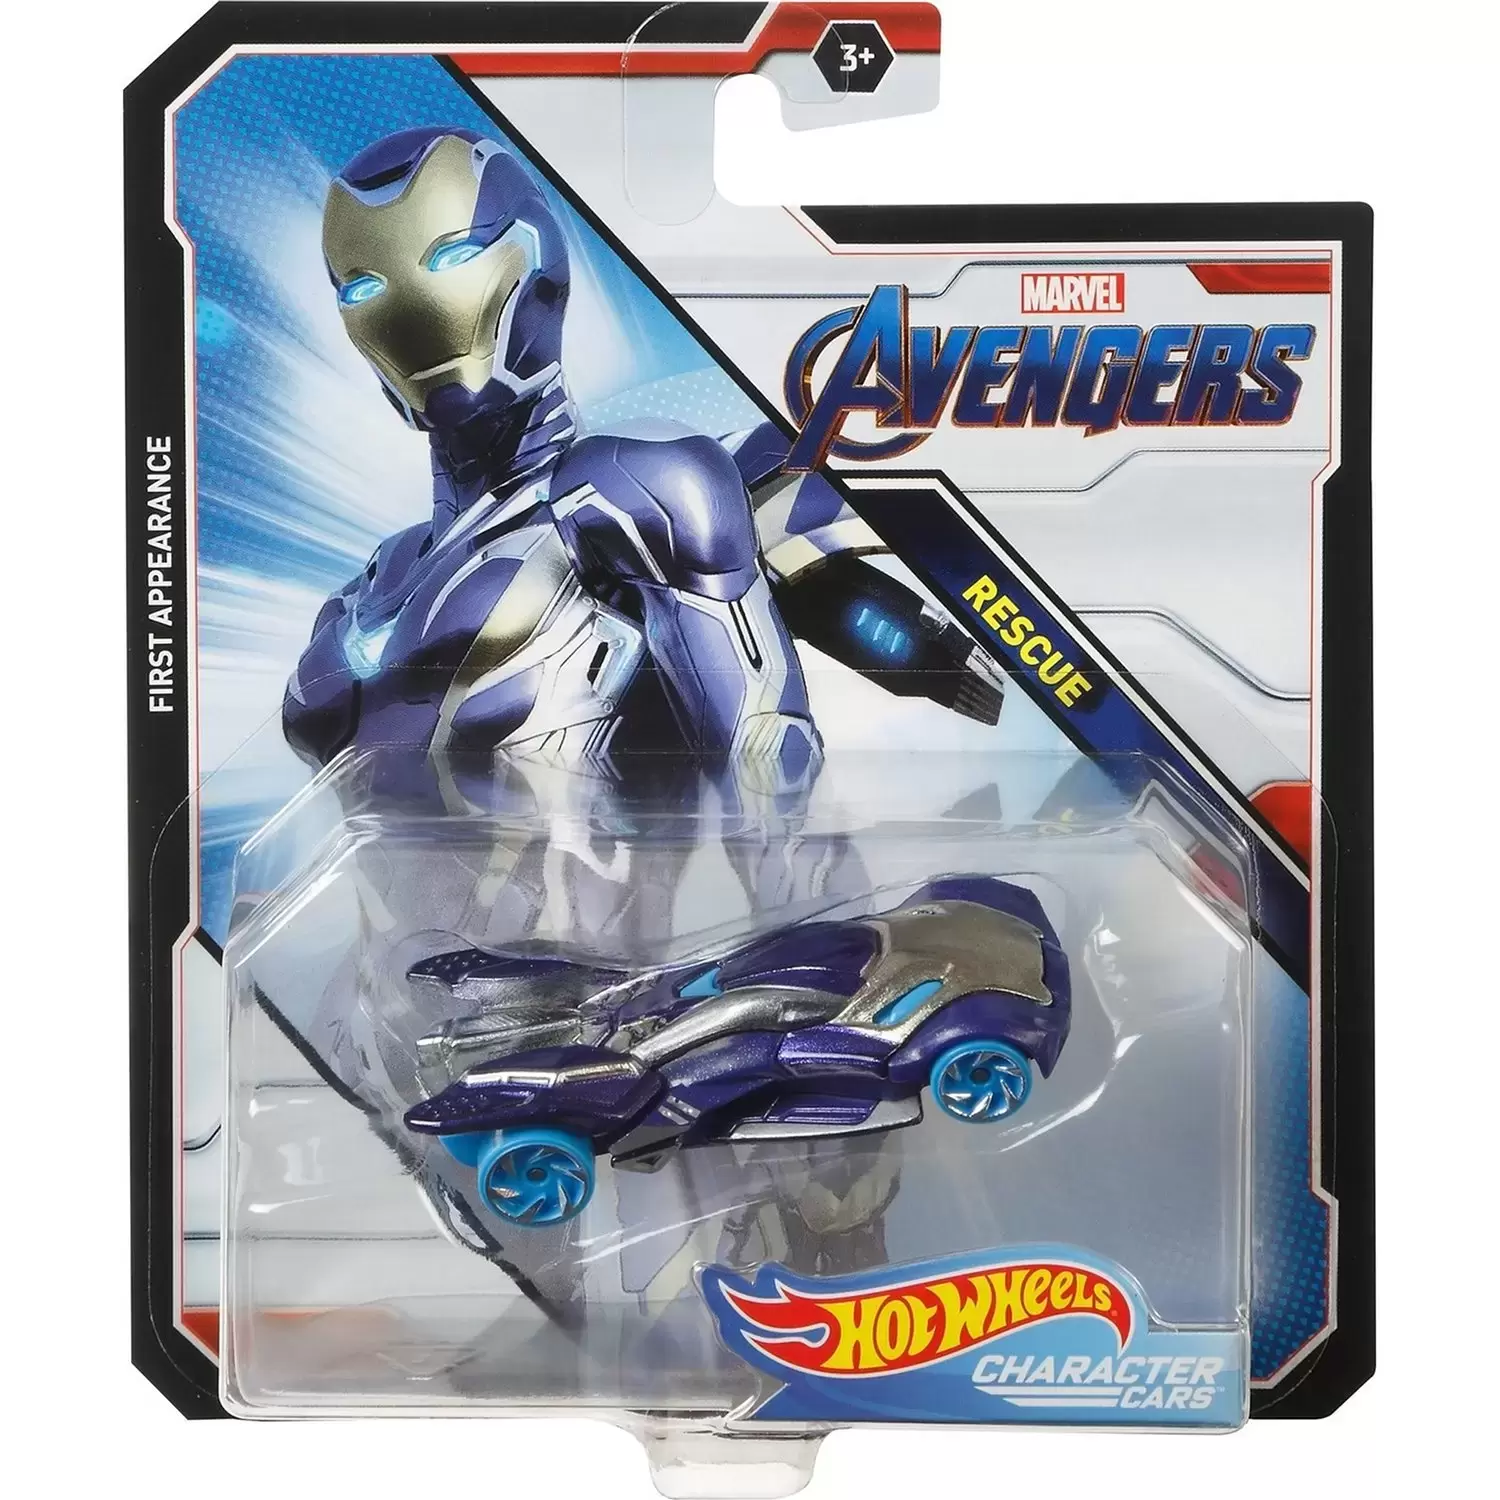 Marvel Character Cars - Rescue